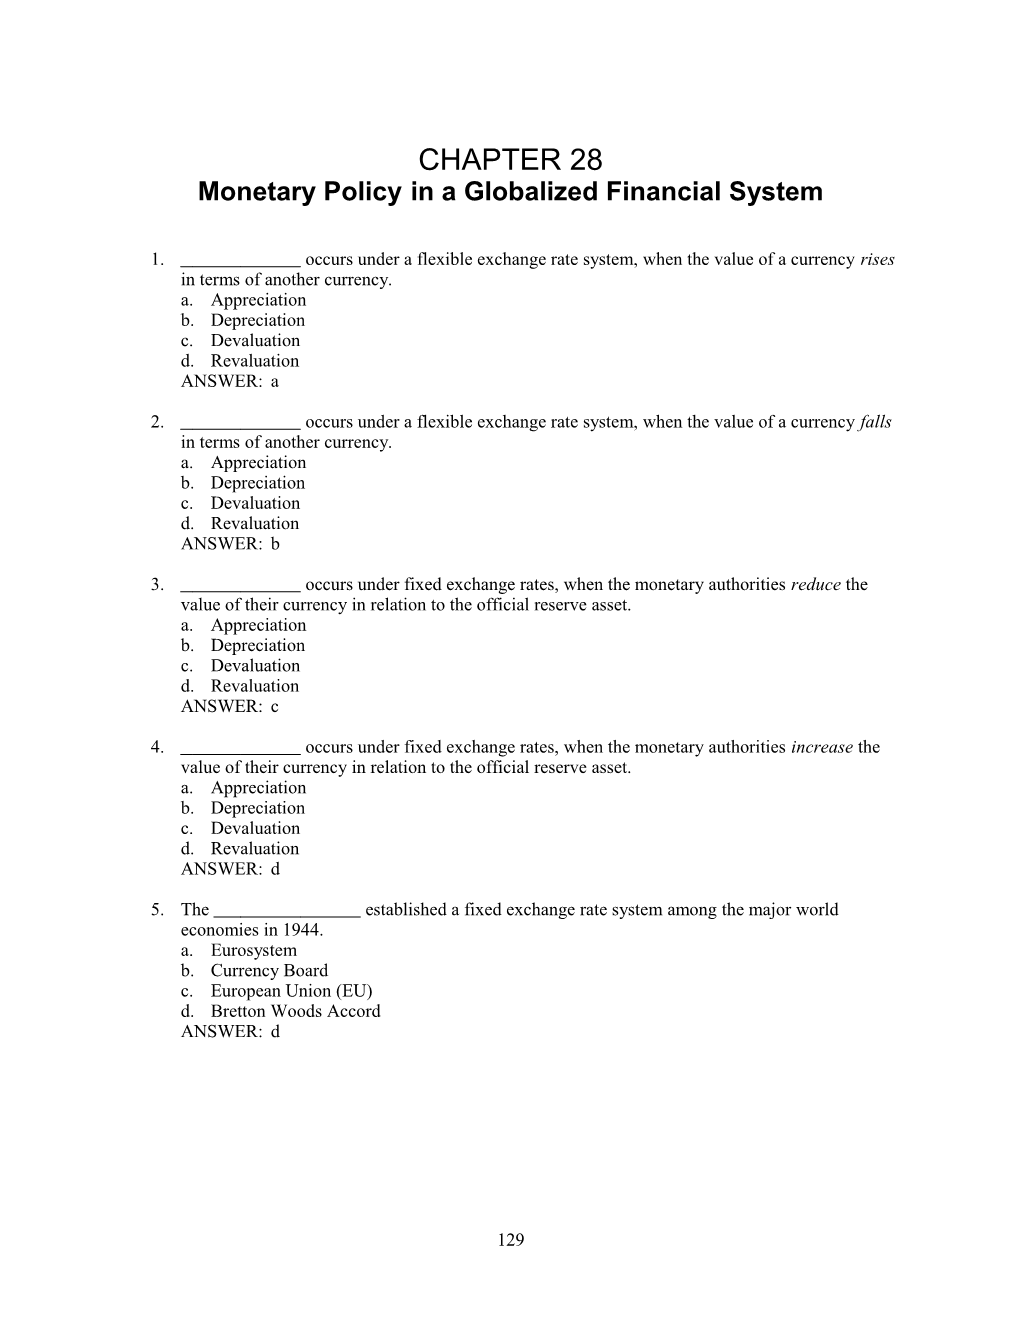 Monetary Policy in a Globalized Financial System1